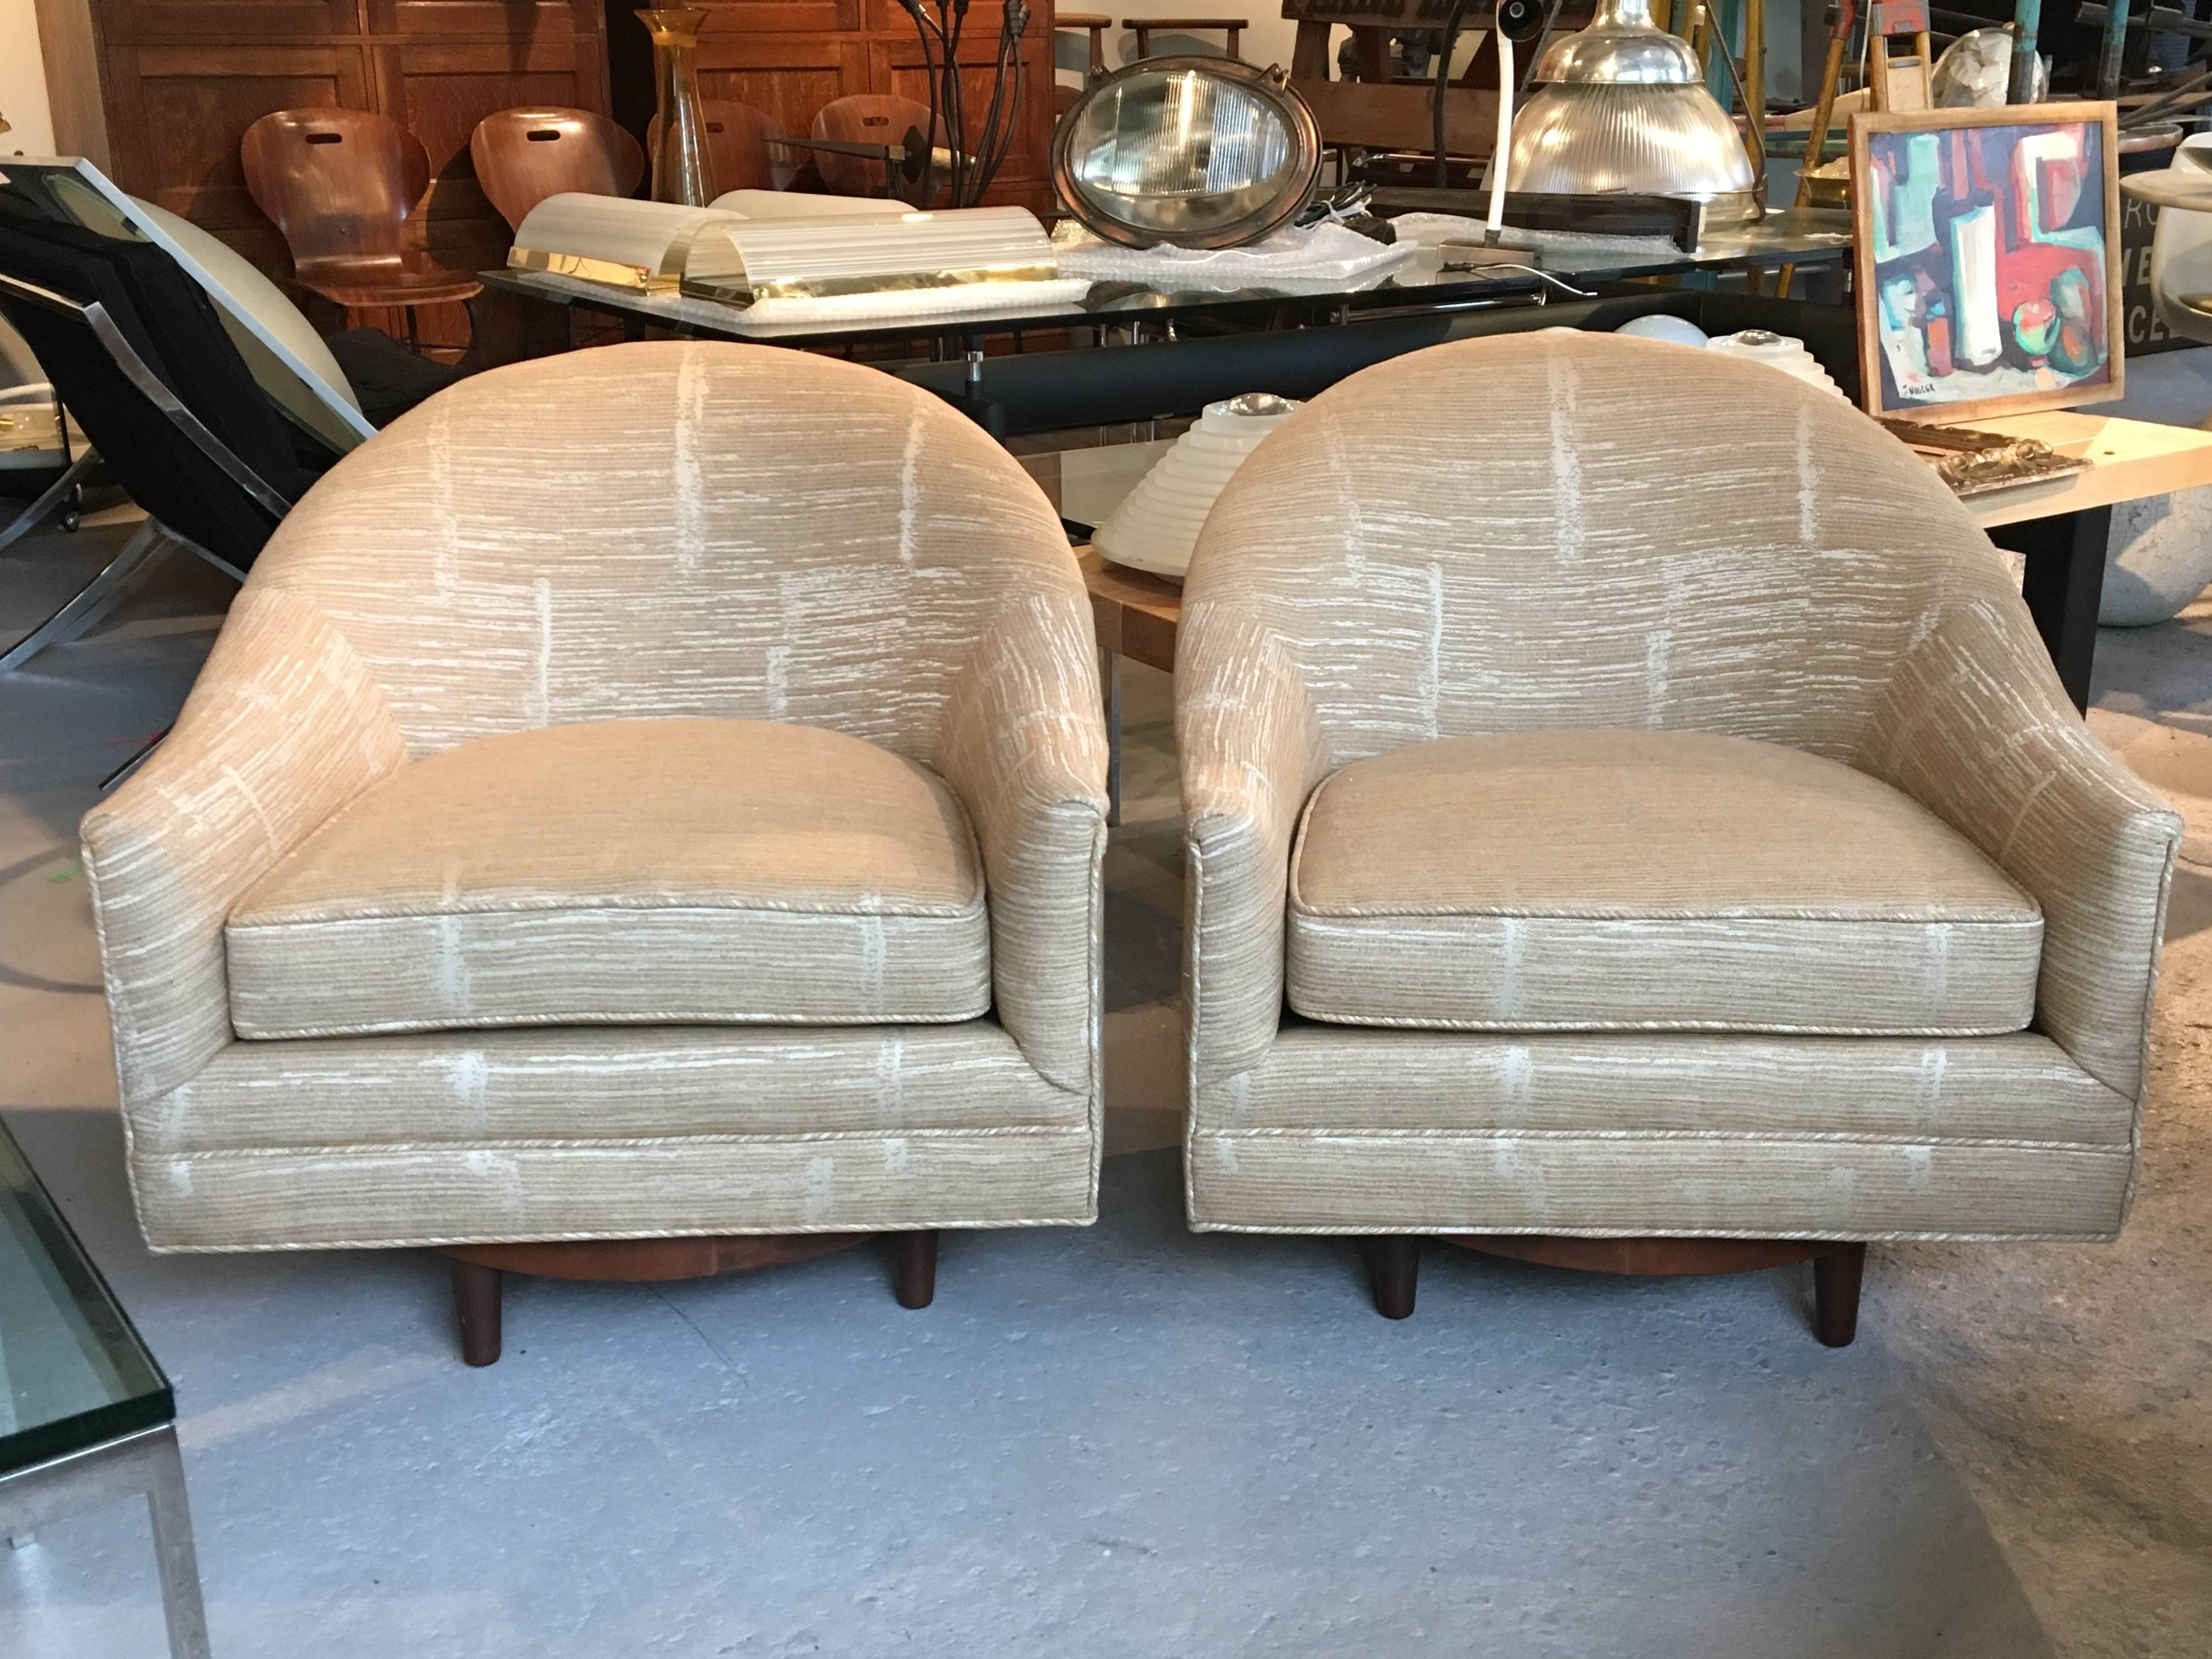 Pair of 1960s swivel lounge chairs by Selig, with walnut bases; all new upholstery, excellent sturdy construction.

Avantgarden Ltd. cultivates unexpected and exceptional lighting, furniture and design. To view items in person please visit our